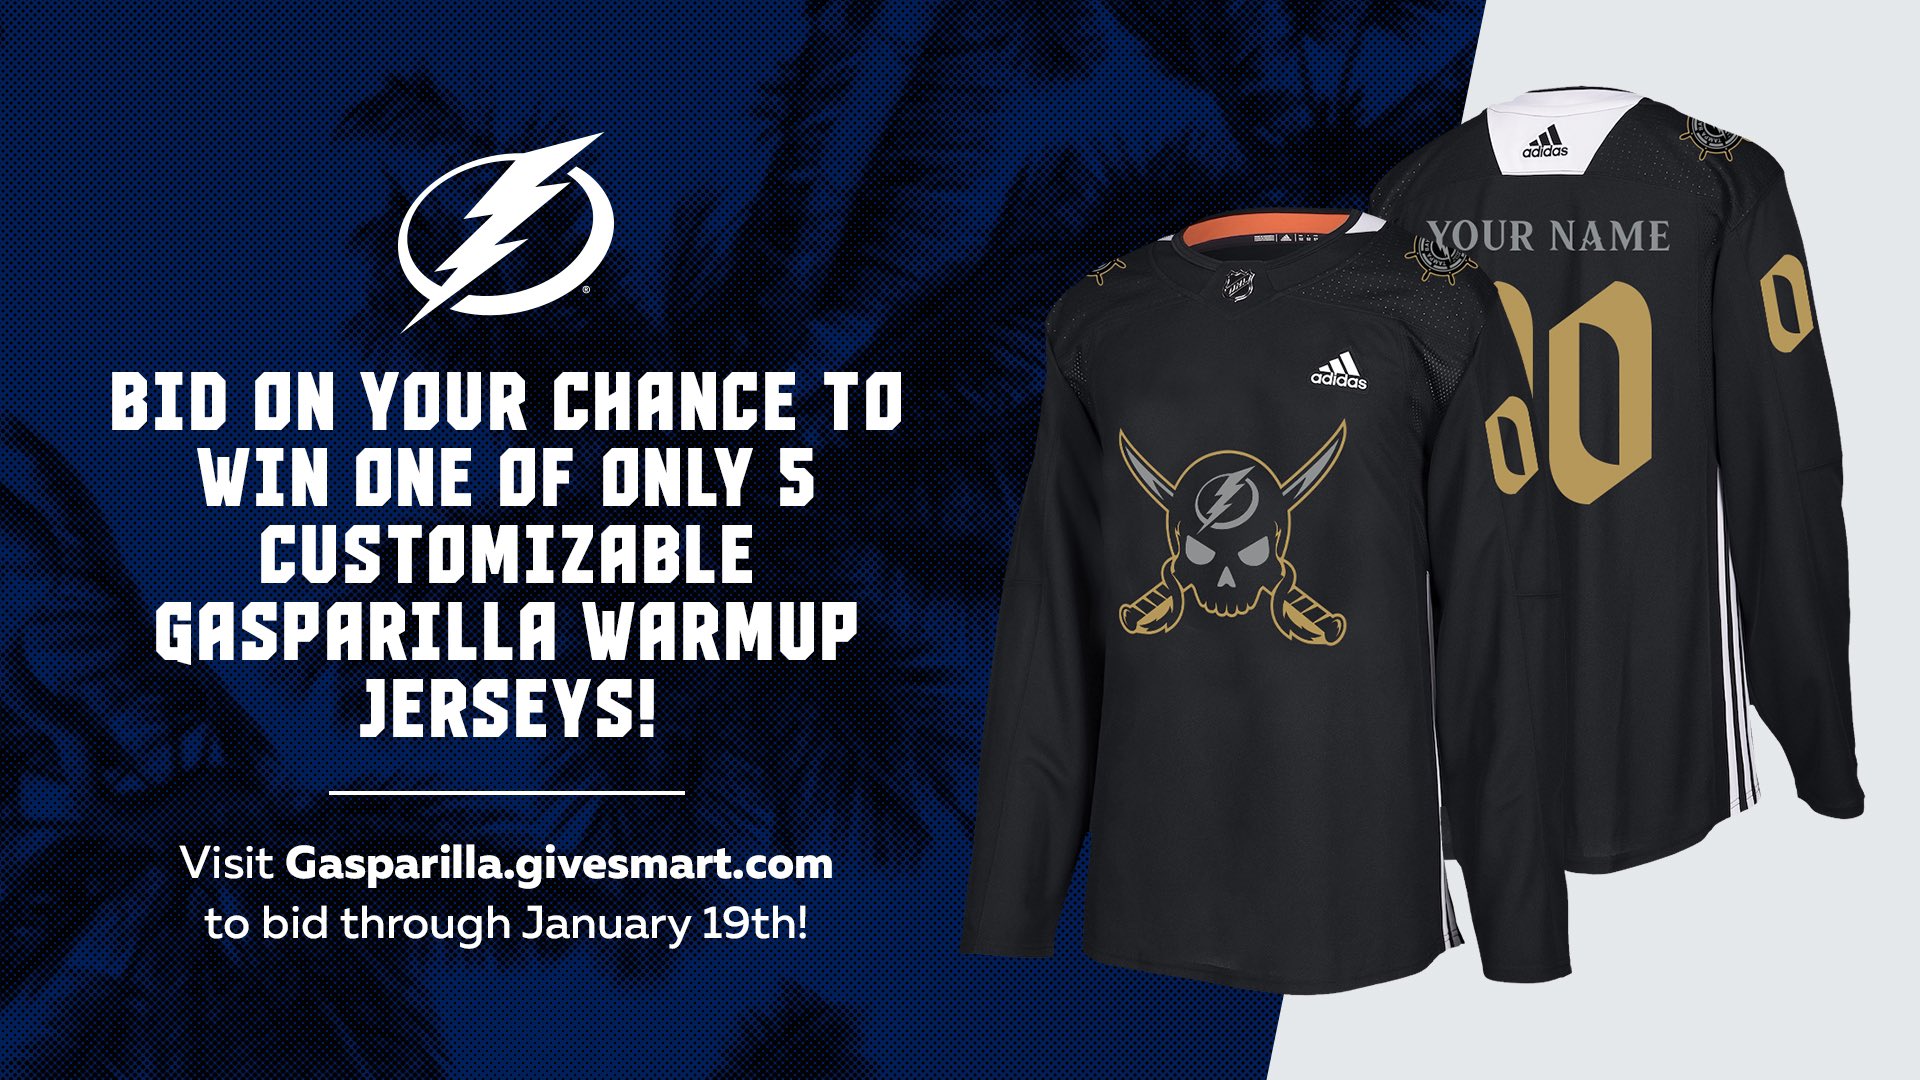 Lightning to celebrate Gasparilla with pirate-themed jerseys